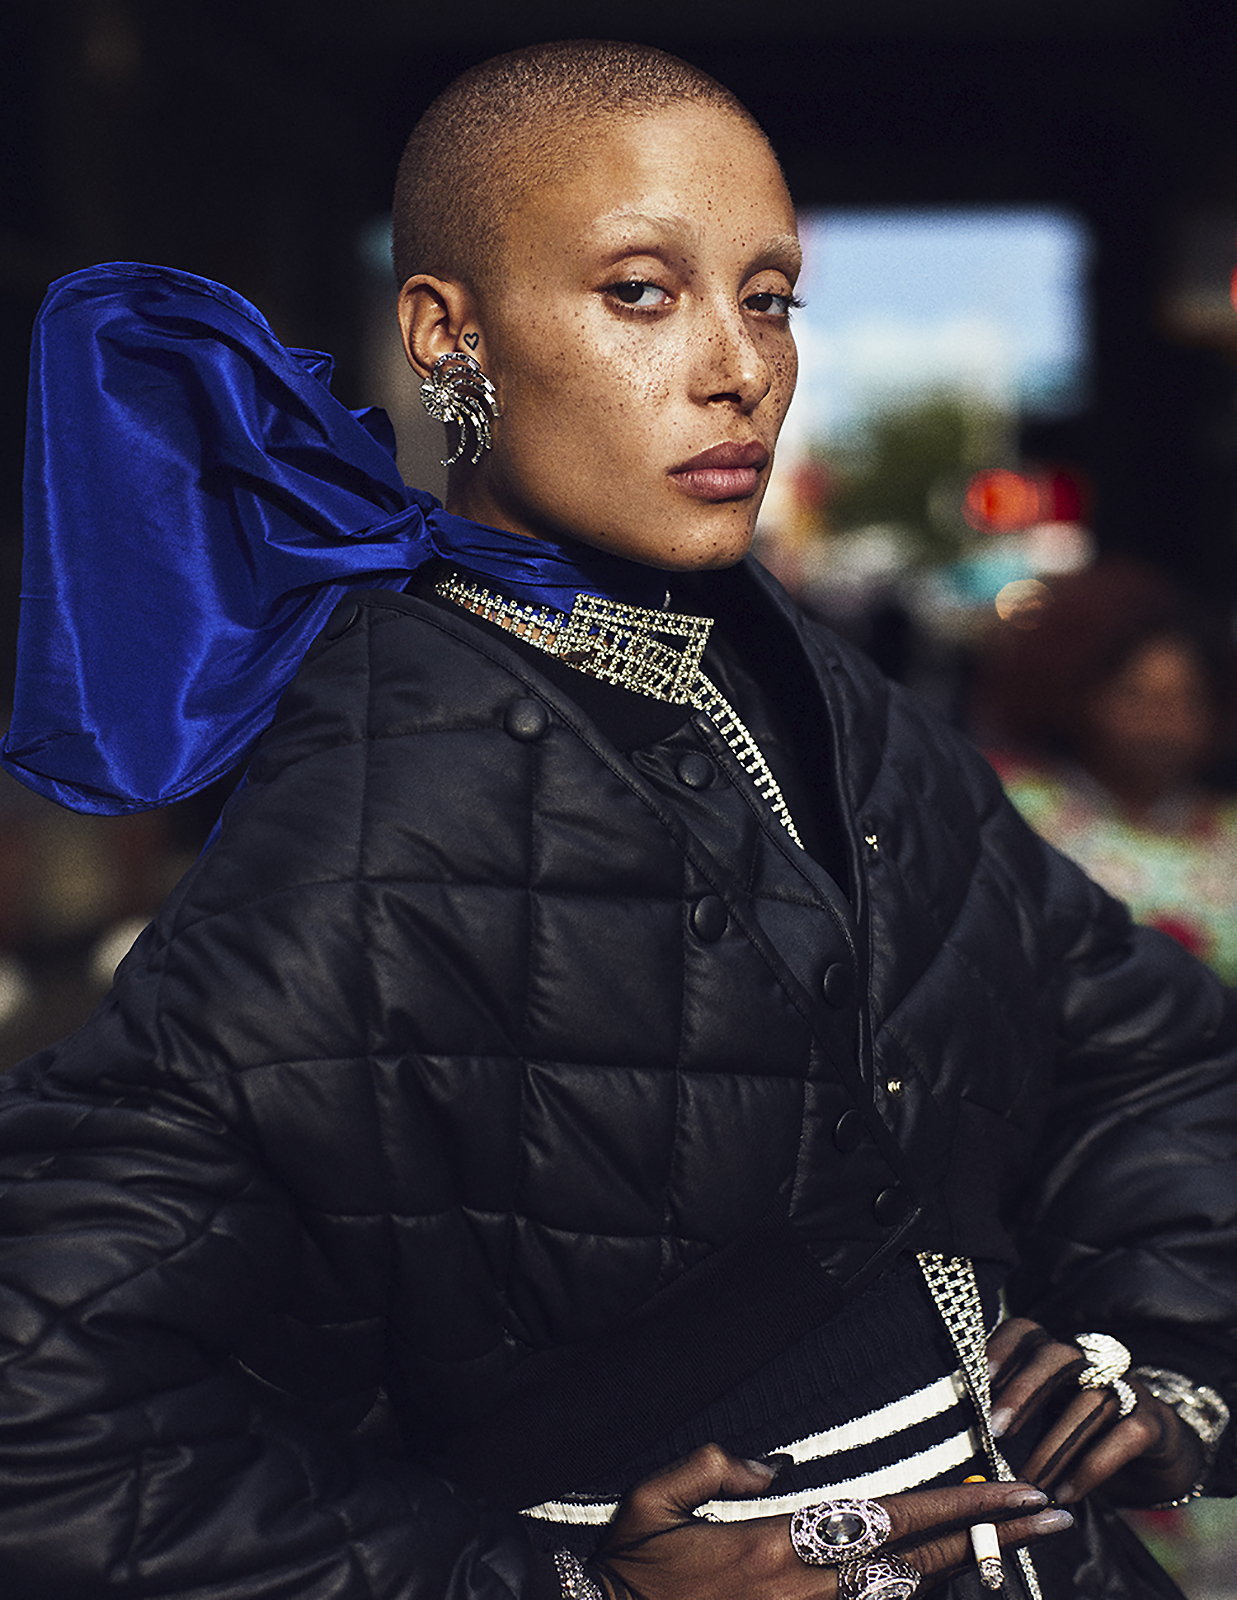 Interview-September-2016-Adwoa-Aboah-by-Mikael-Jansson-11.jpg